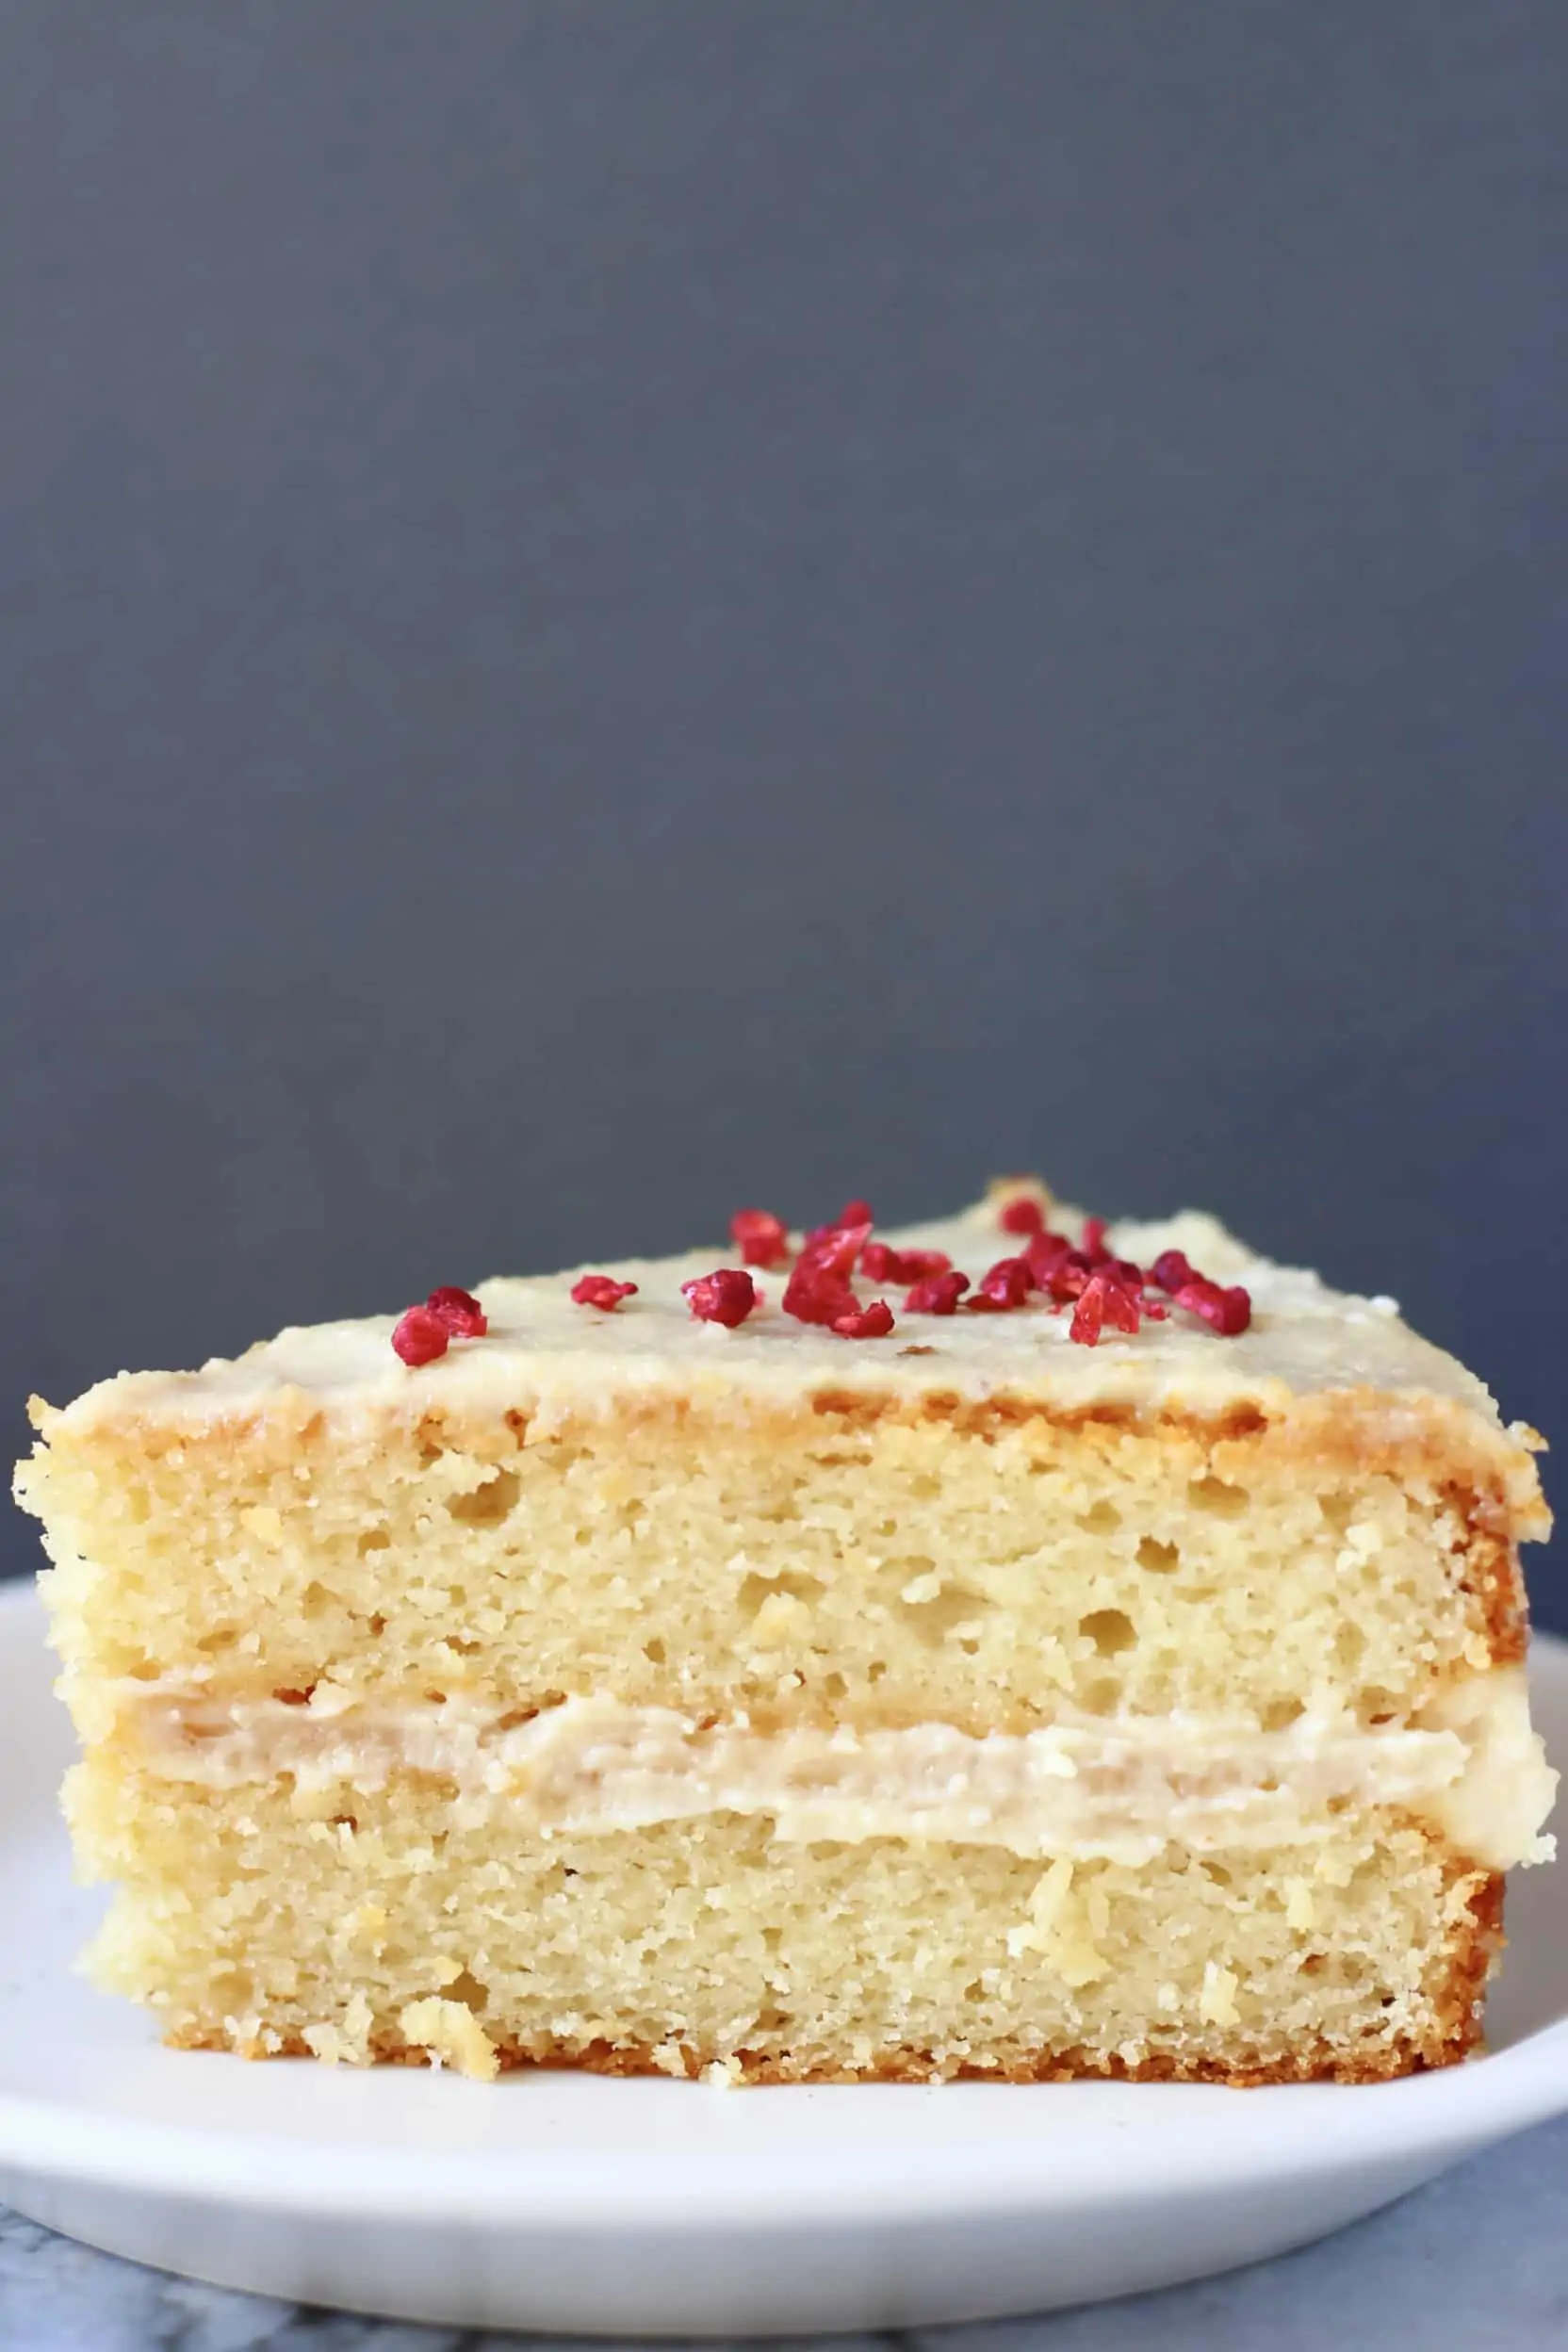 A slice of gluten-free vegan vanilla cake with buttercream on a plate